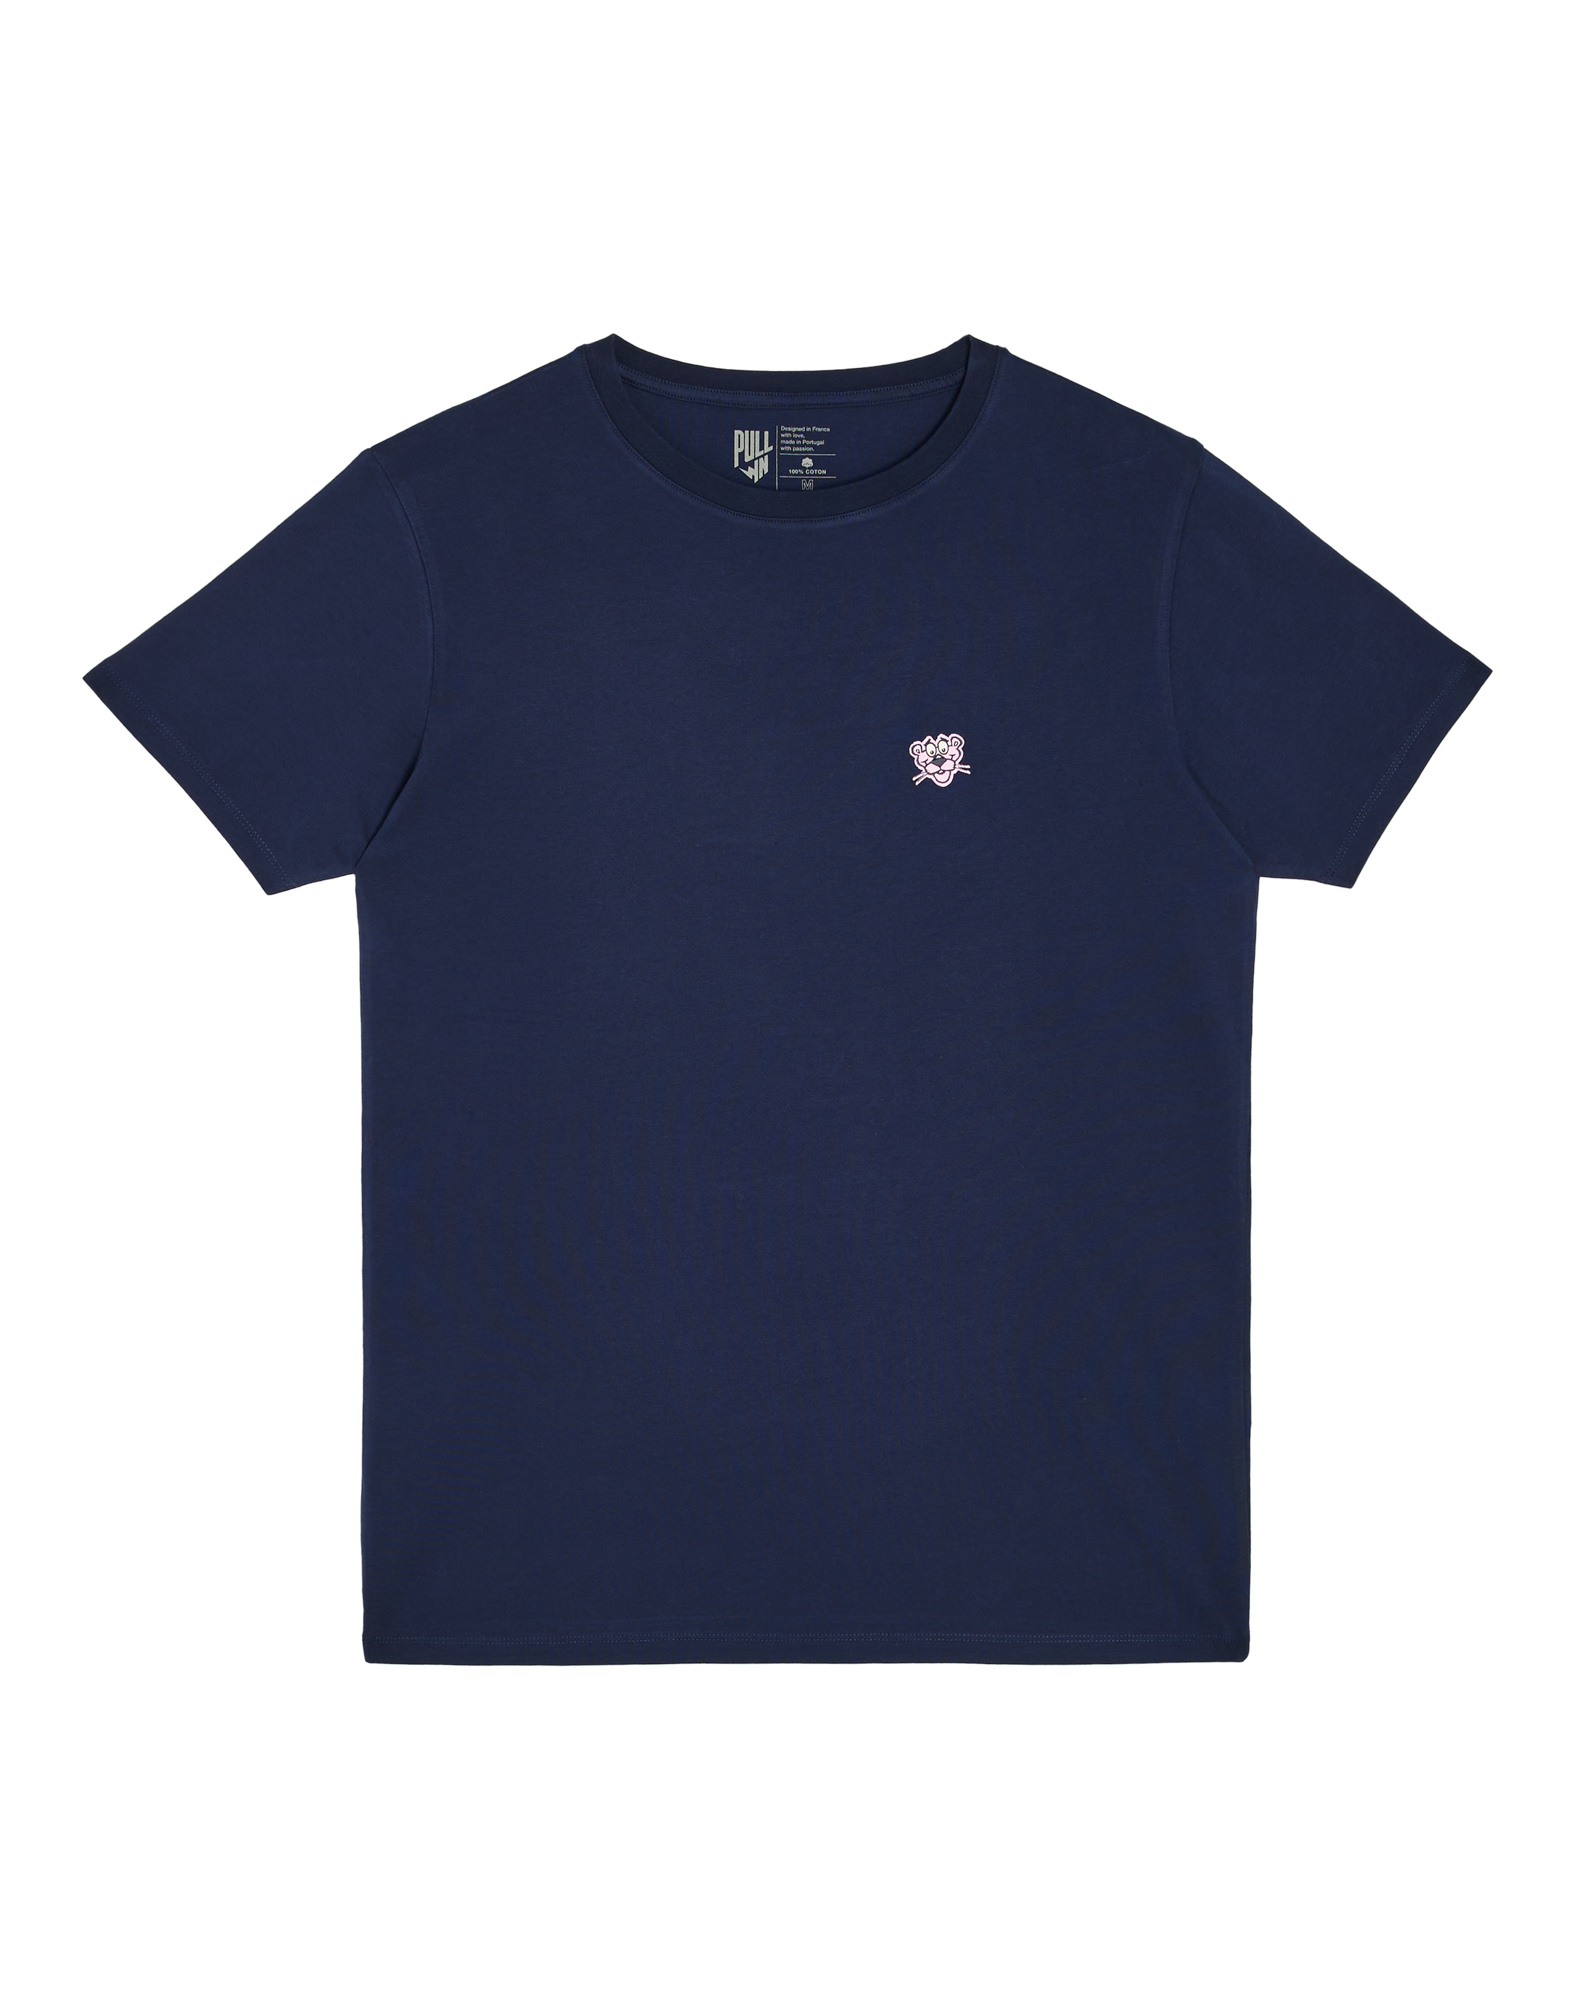 T-shirt homme PATCHMADPINKYJEAN